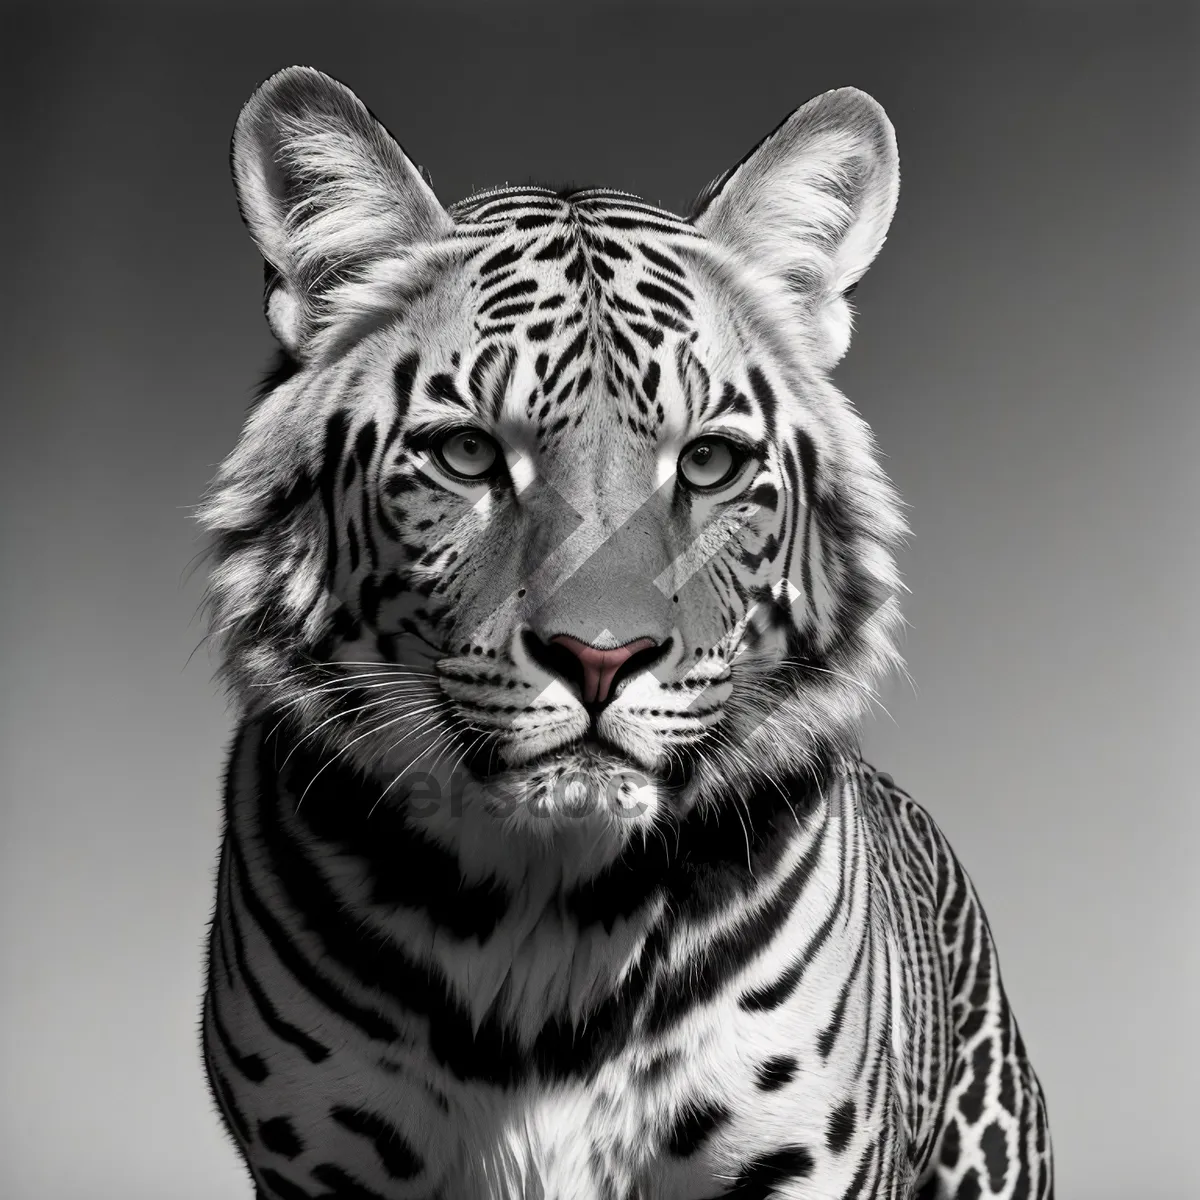 Picture of Fierce Tiger Staring with Intense Eyes